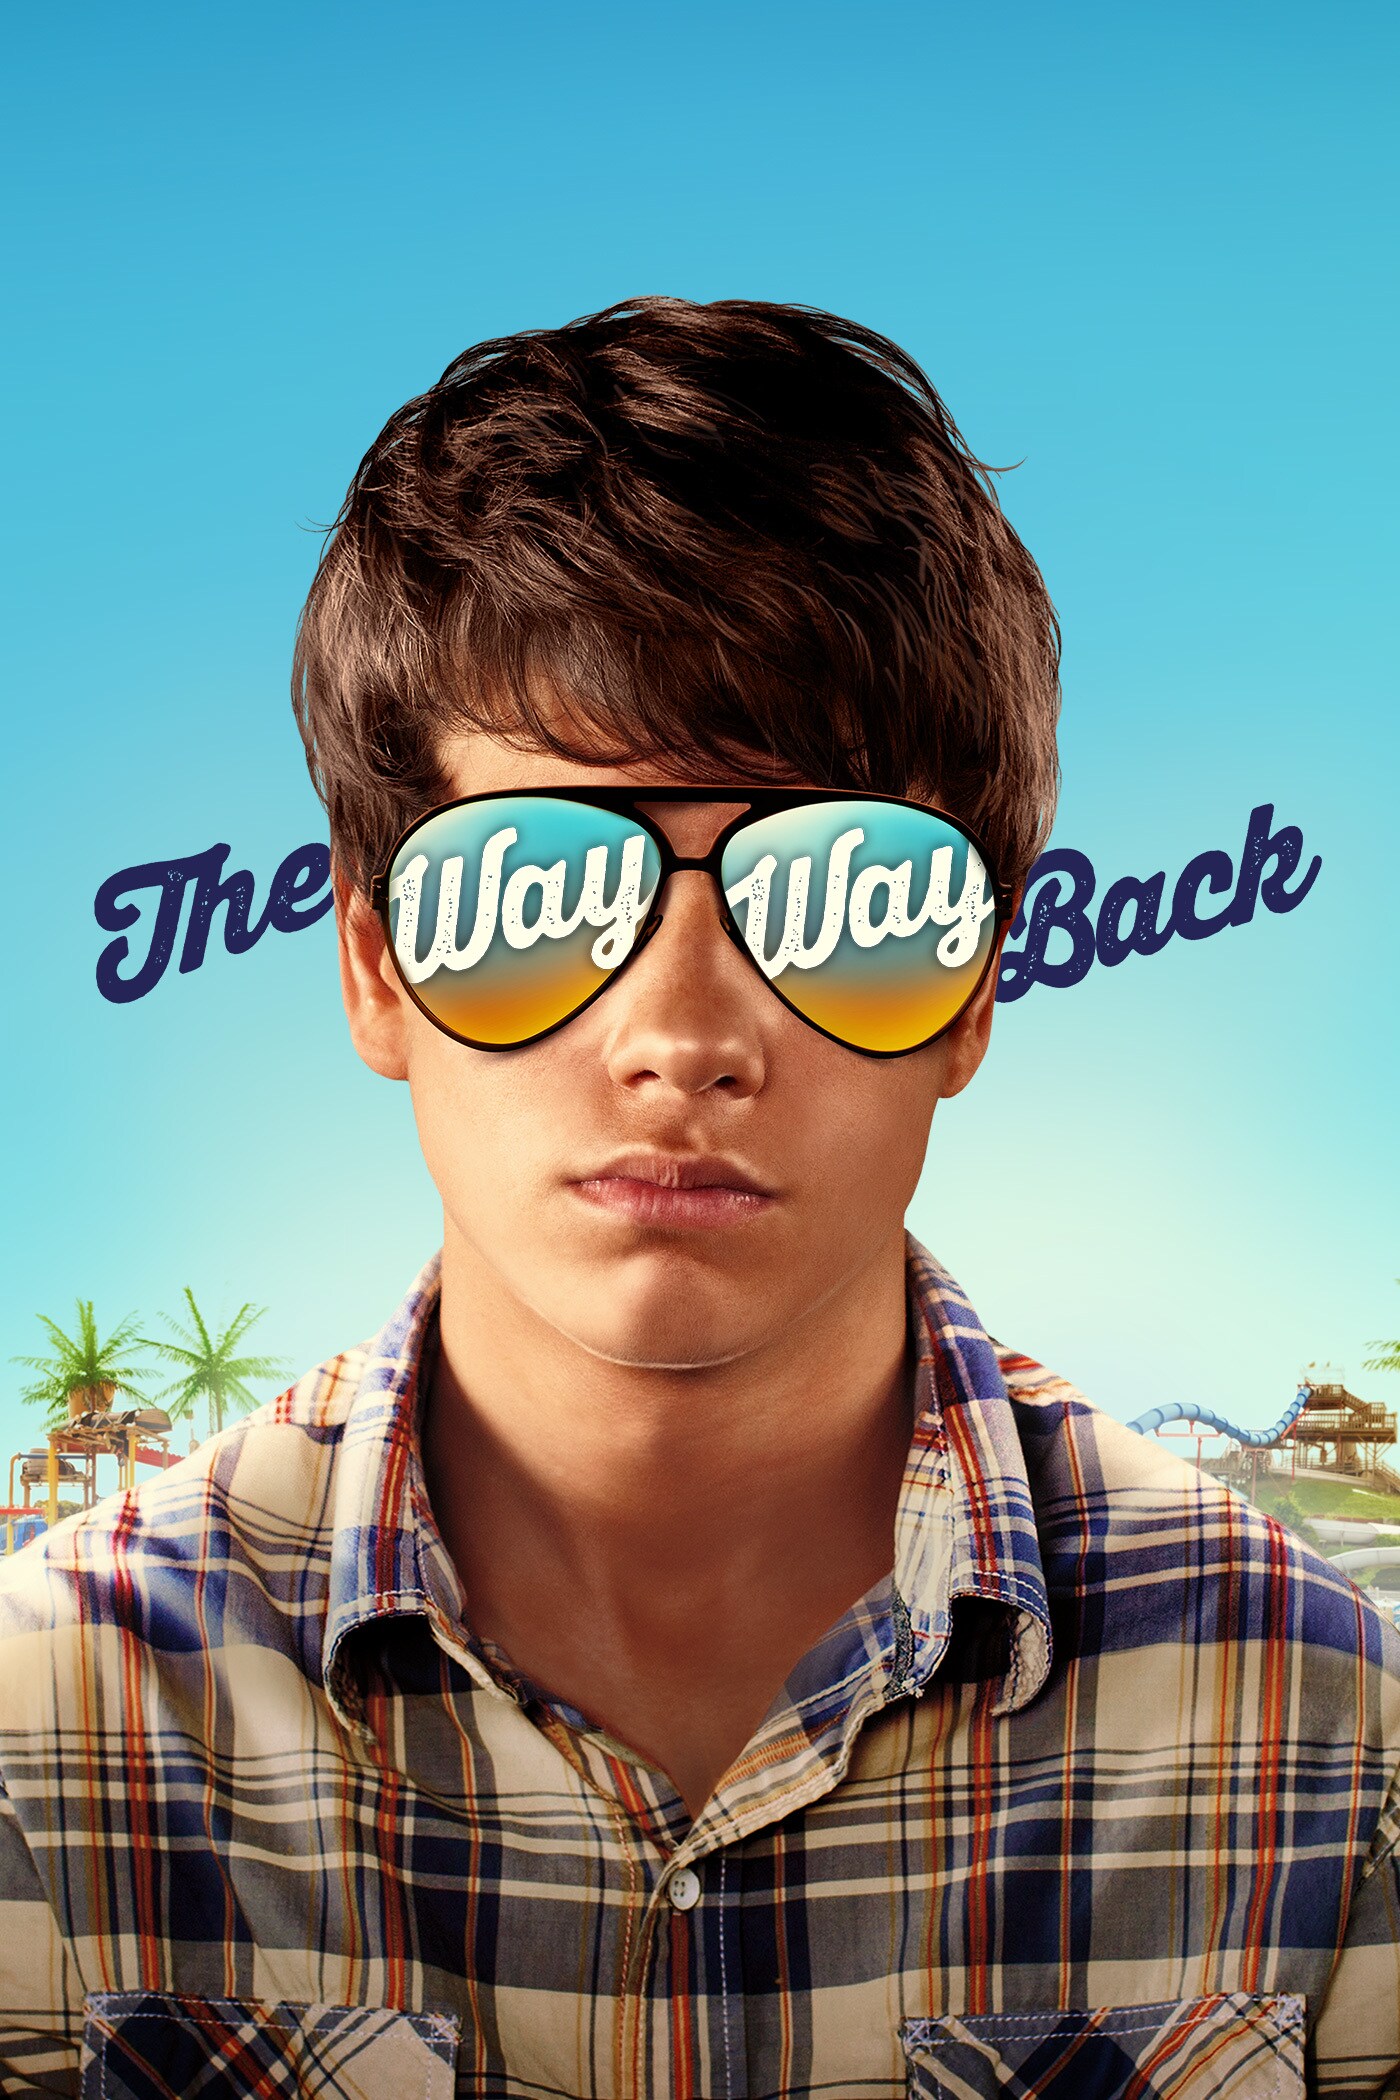 The Way, Way Back movie poster